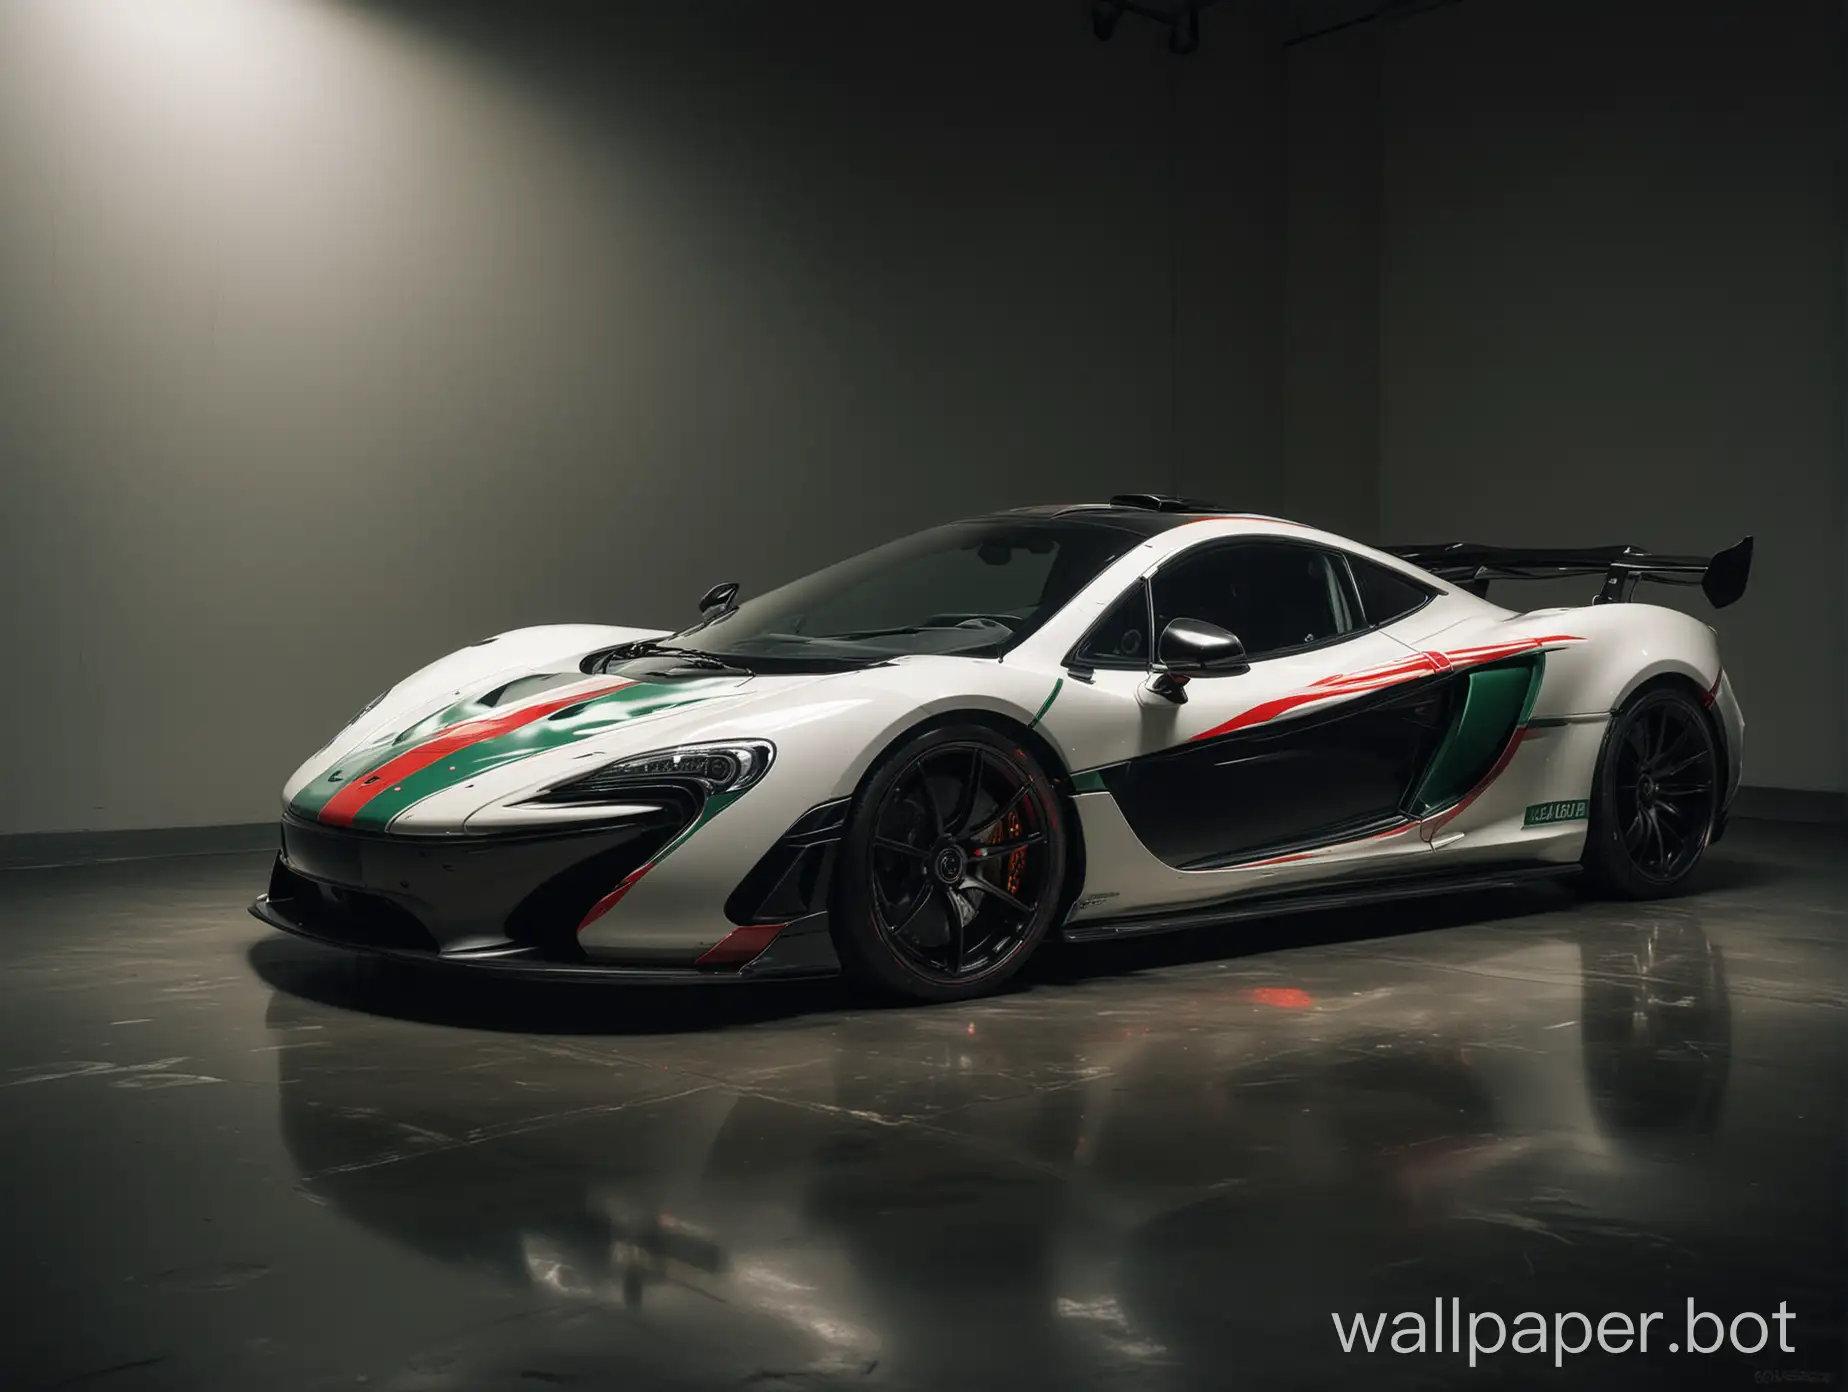 Sleek-White-McLaren-P11-Racing-Car-with-Green-and-Red-Stripes-in-Dimly-Lit-Environment